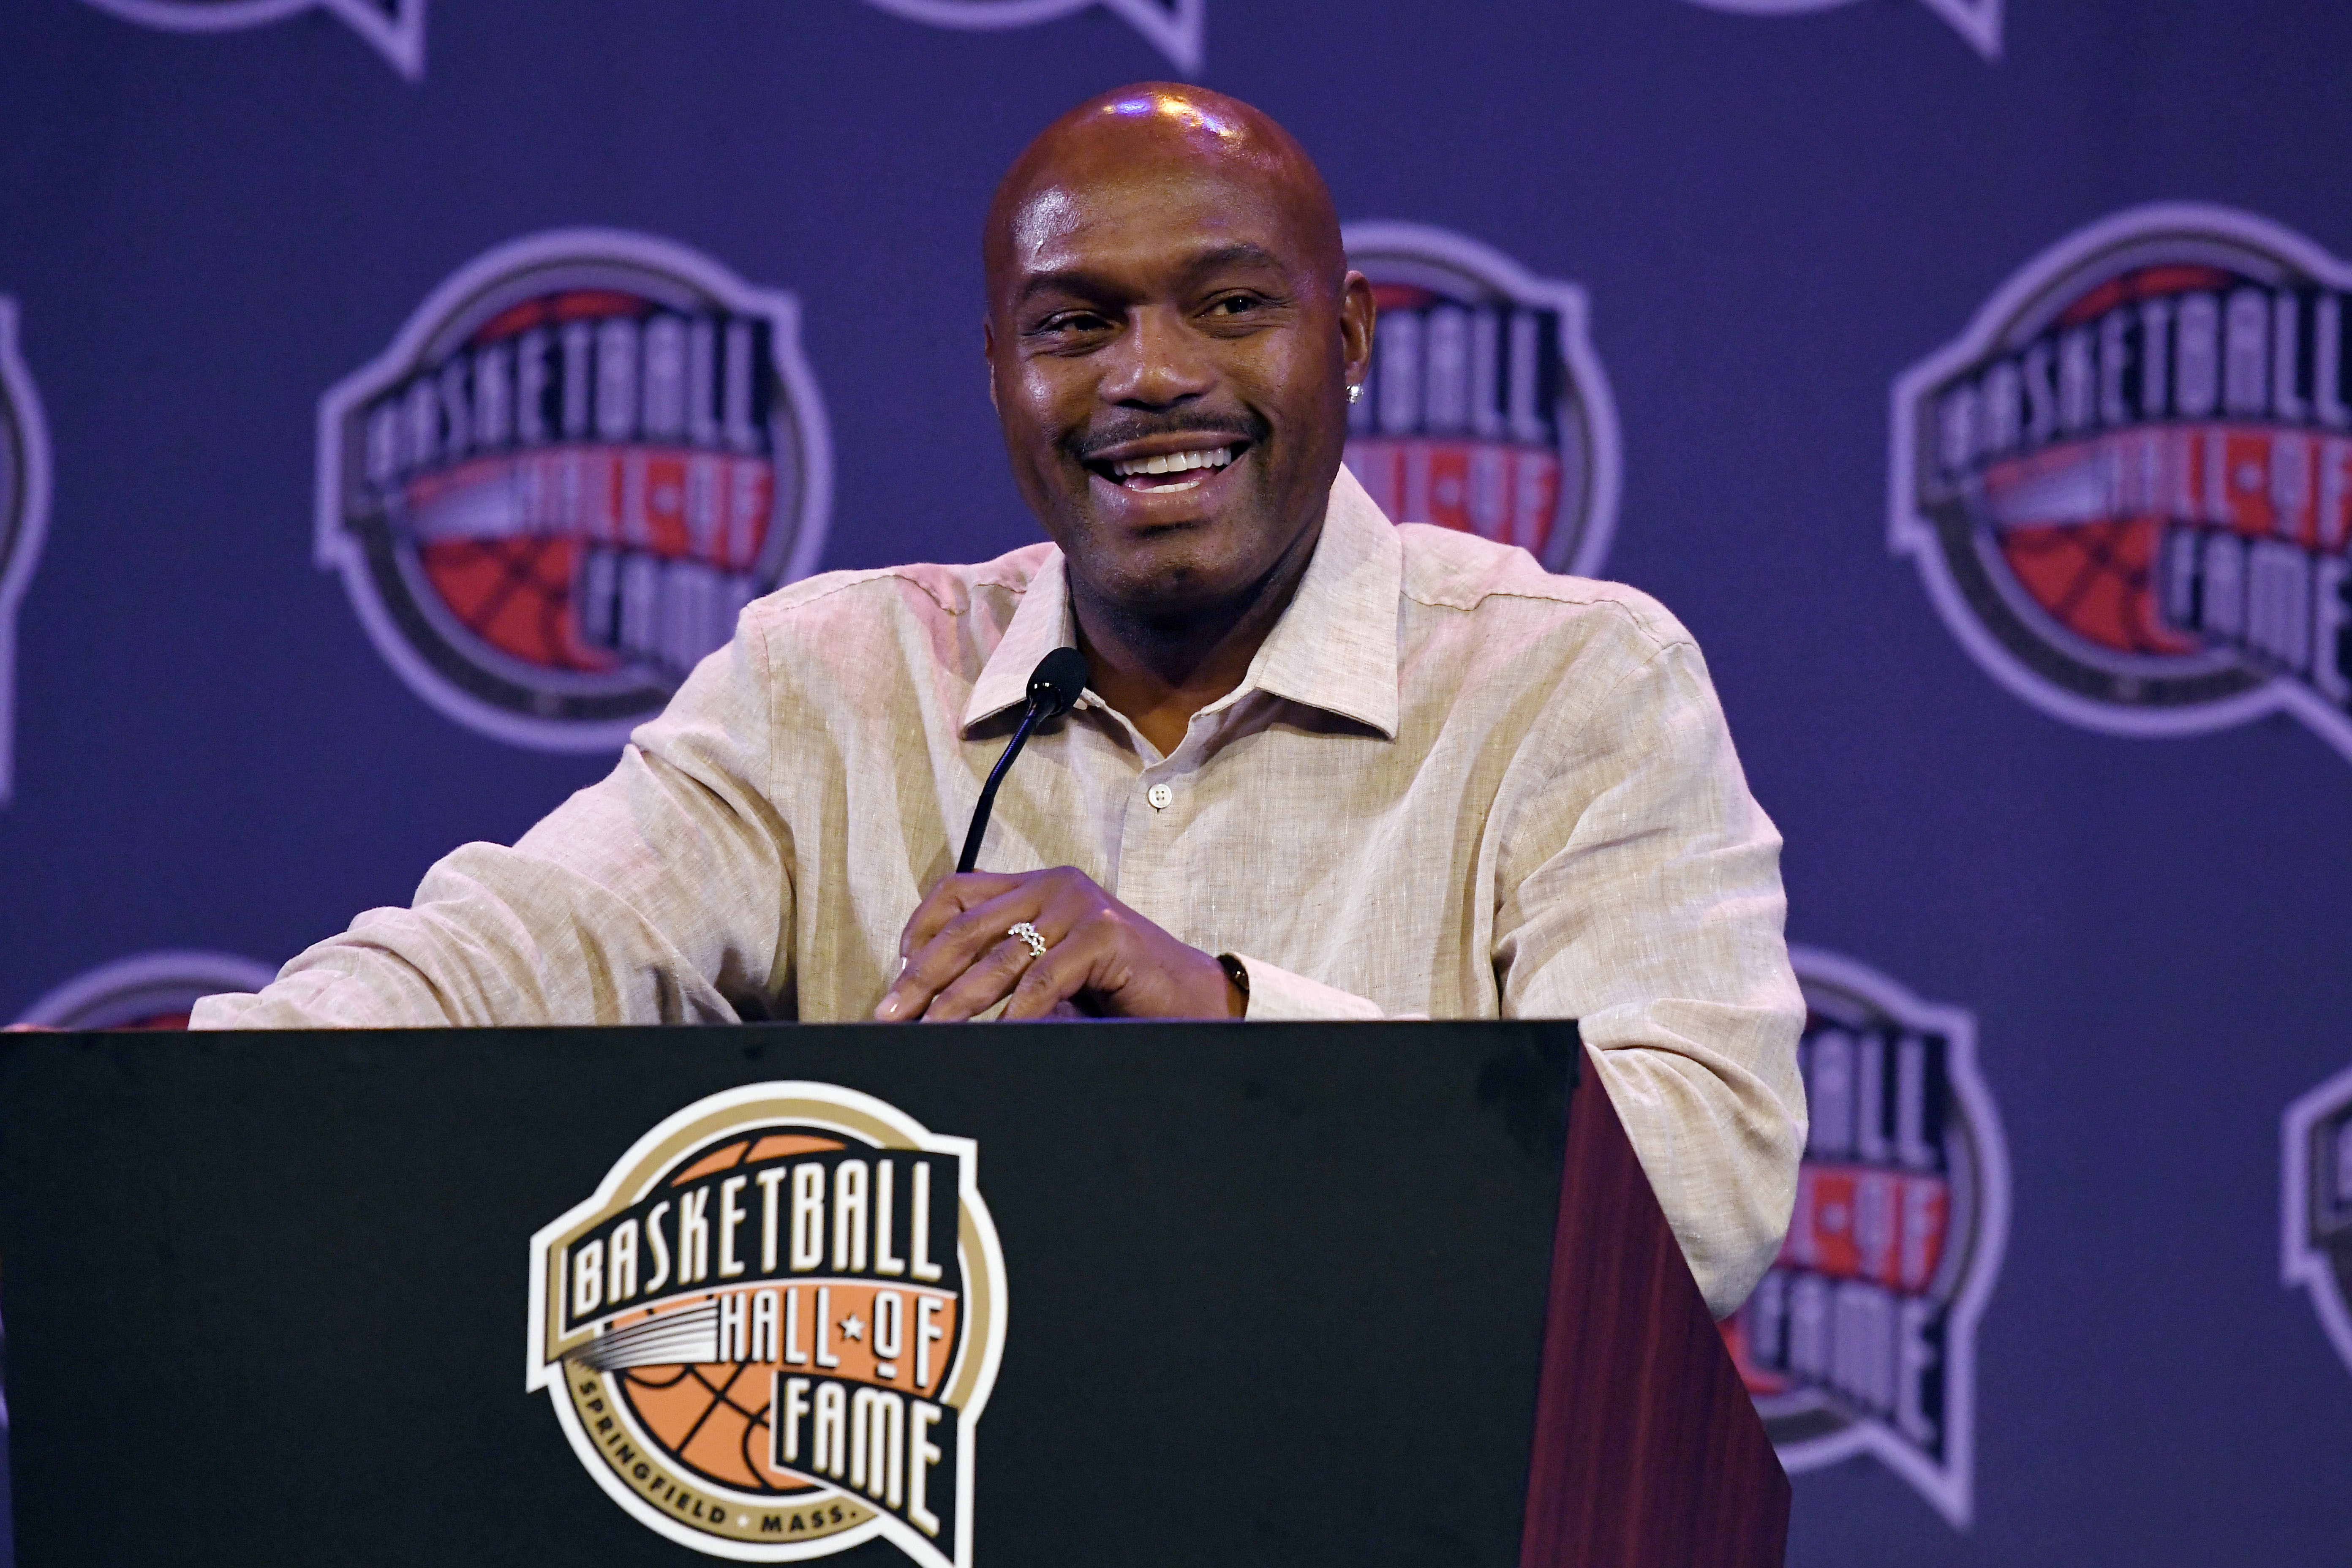 SportsEdTV Coach, 5-Time NBA All-Star, Tim Hardaway Is a Hall of